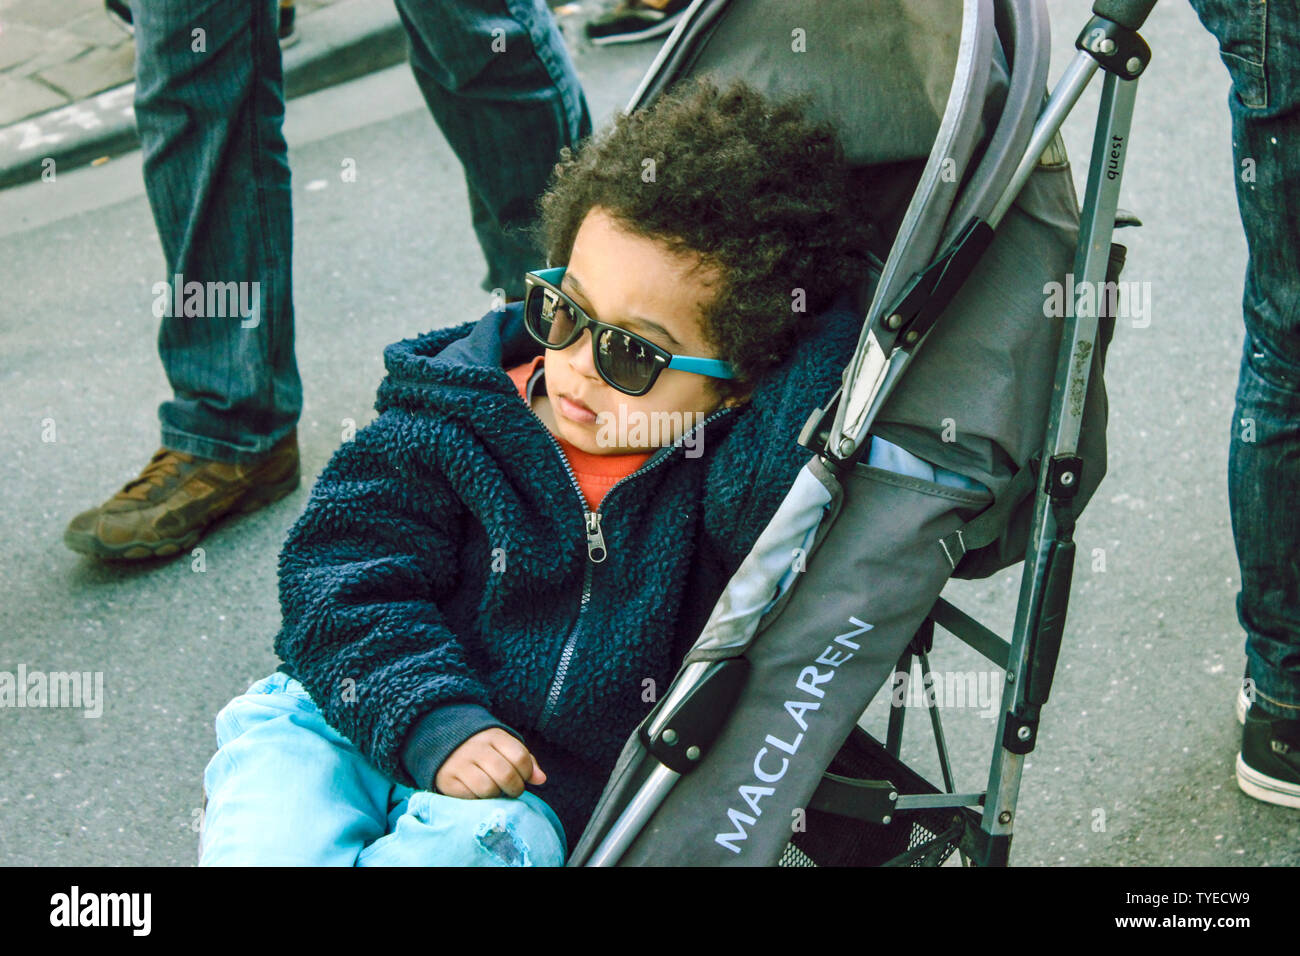 June 2019, Bruxelles, Belgium. Handsome and stylish wearing sunglasses in his pram/pushing chair. Cool cute black kid w blue sunglasses and curly hair Stock Photo